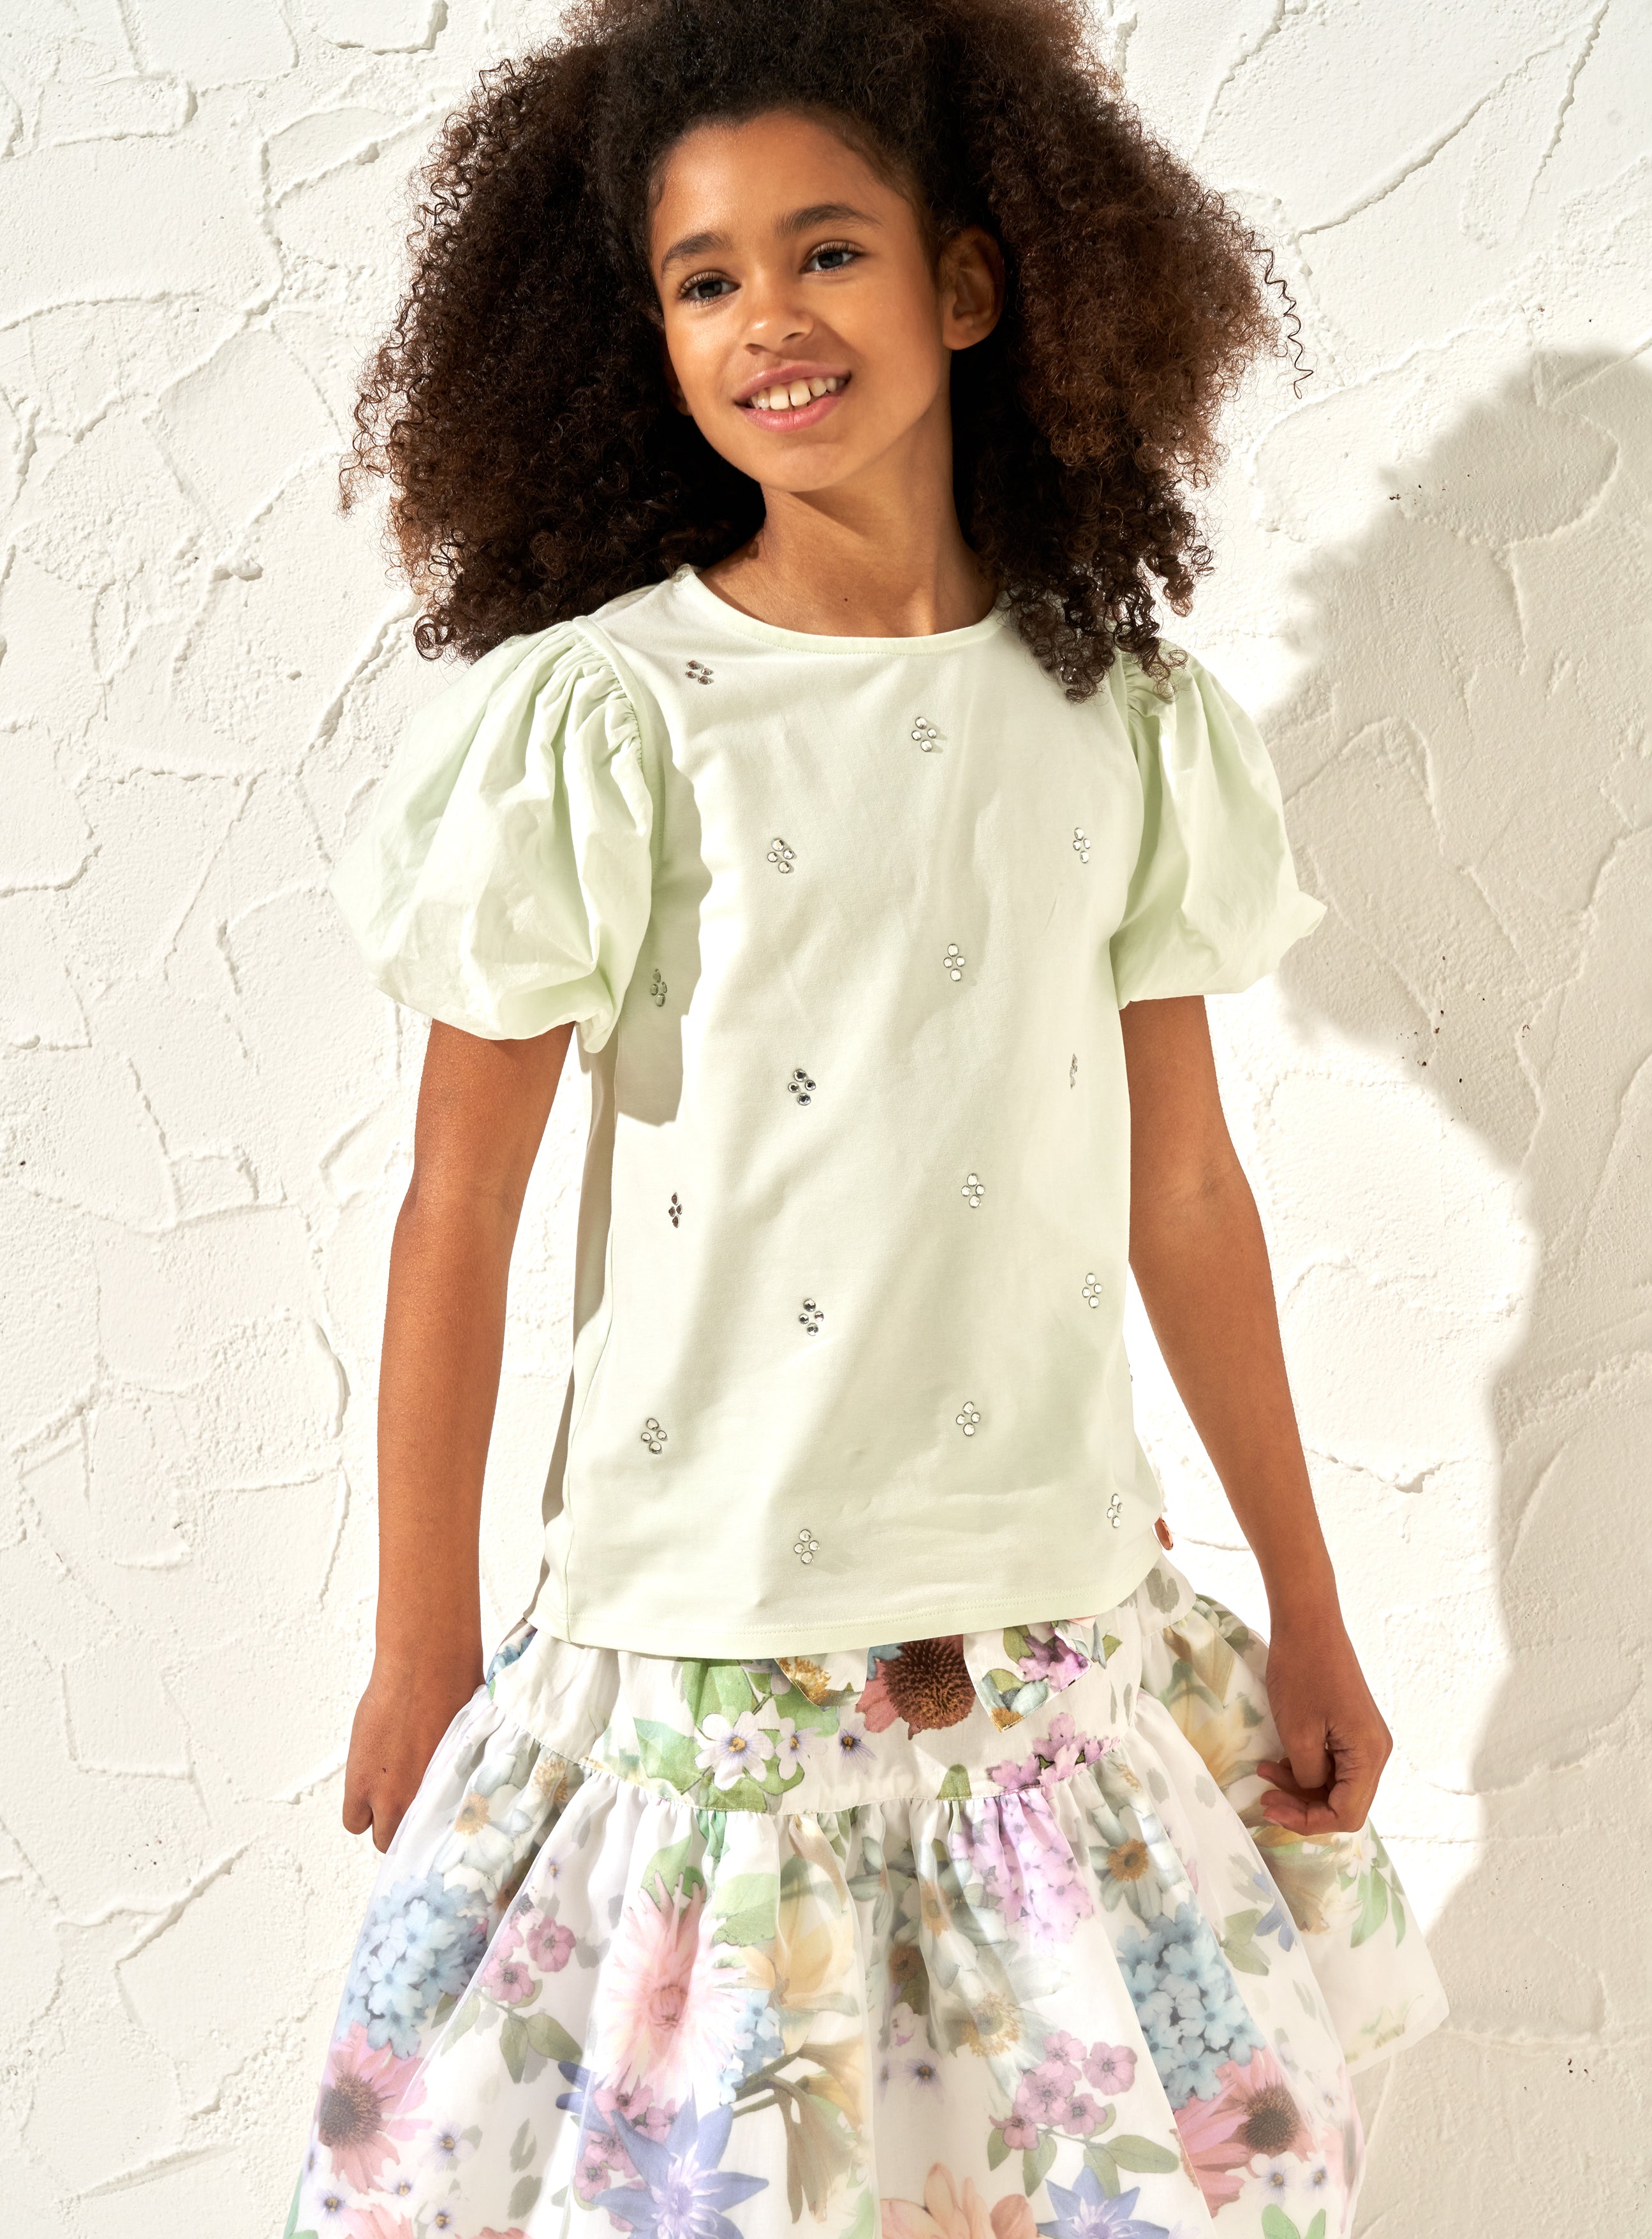 Girls Self Textured Cotton Green Top with Puff Sleeves